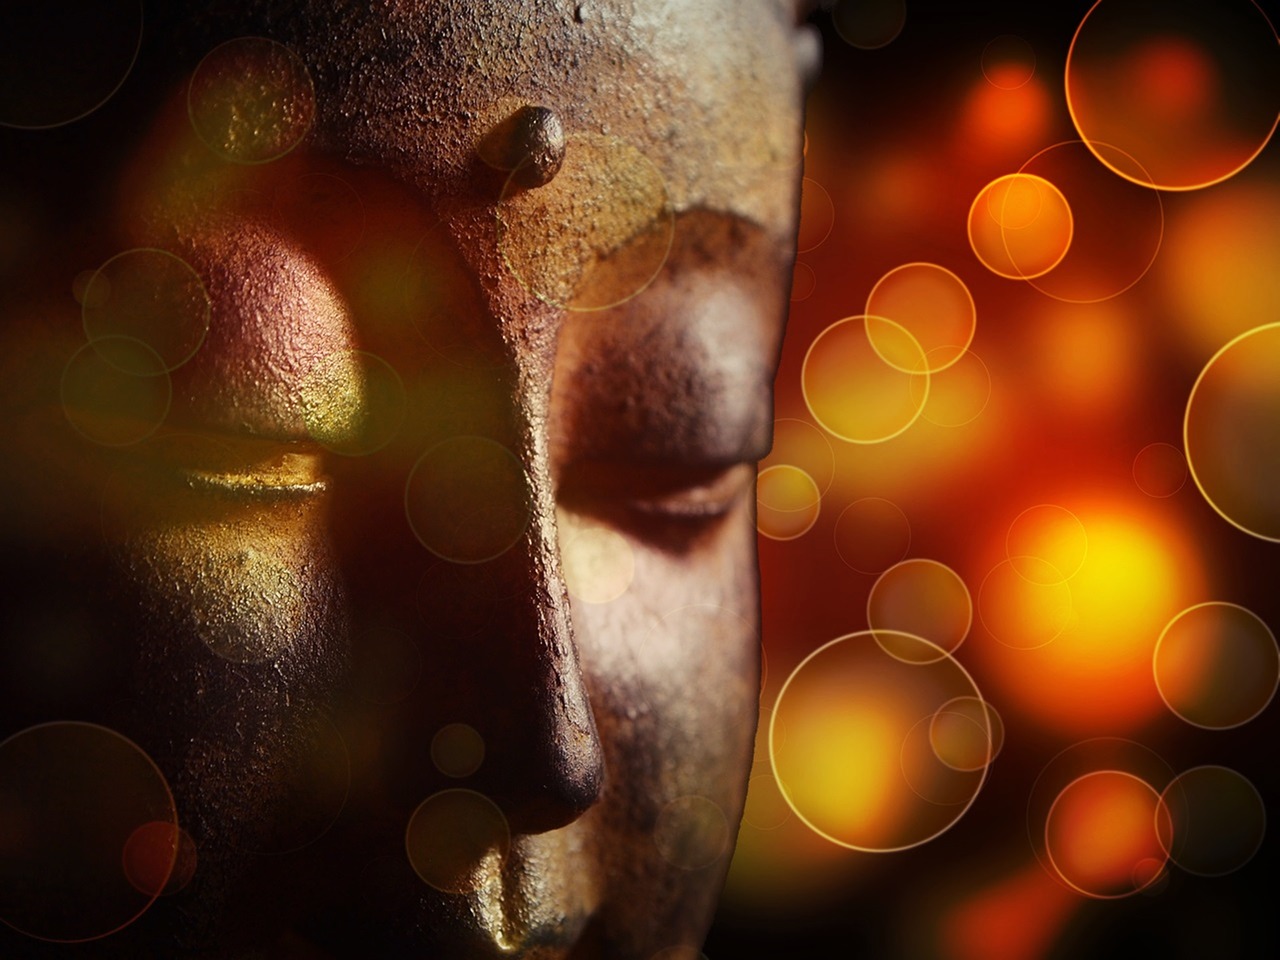 Psychic Abilities, Close up image of a bronze Buddha face with orange camera light flares